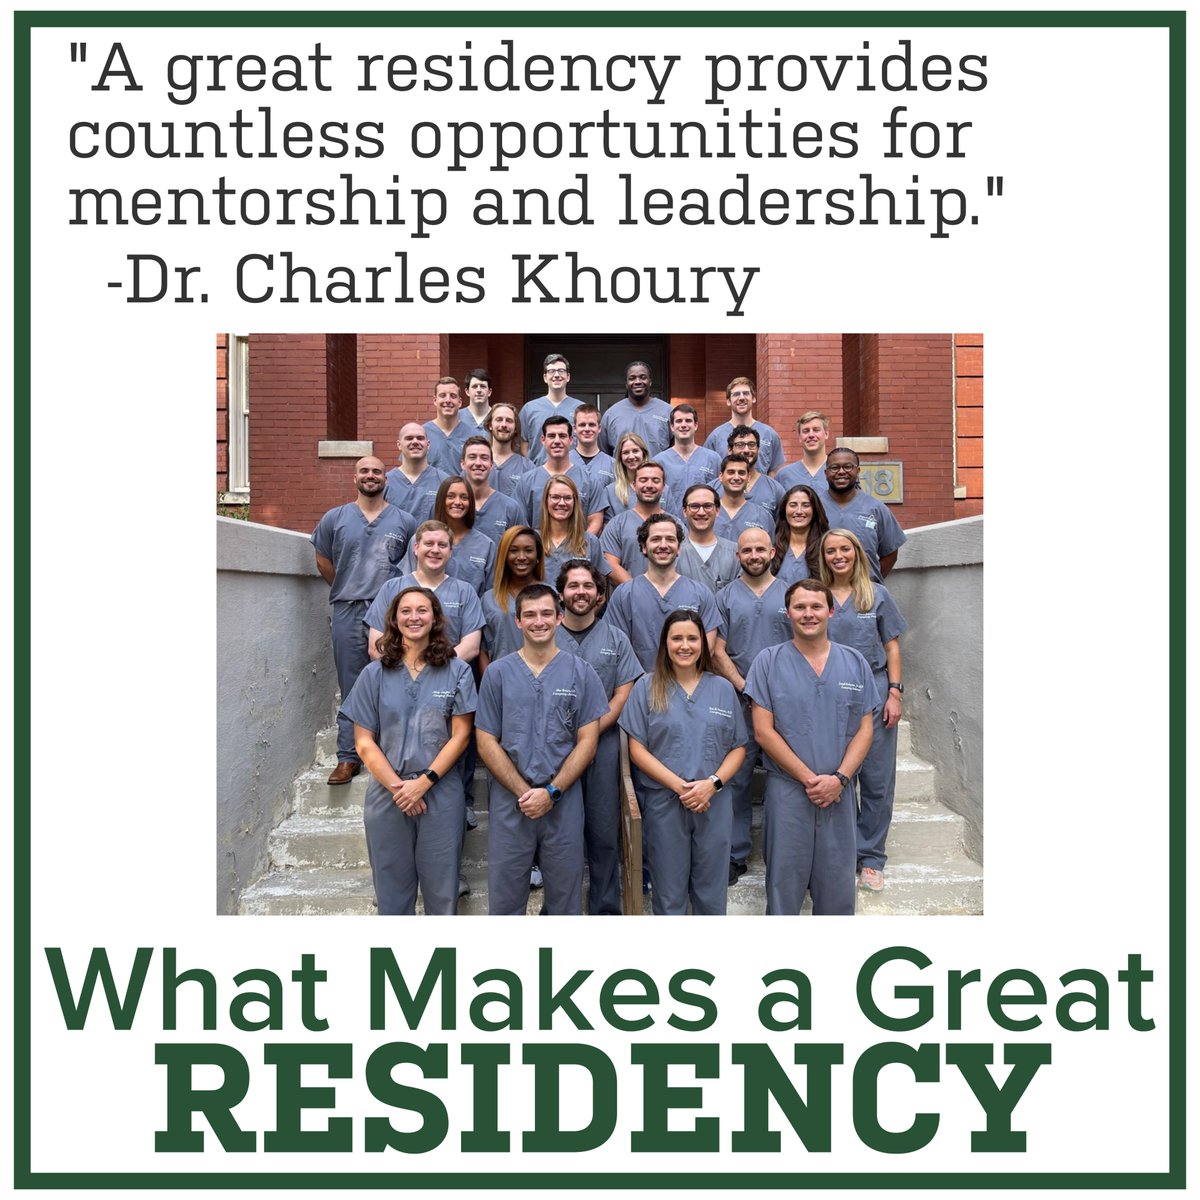 In Part Two of 'What Makes a Great Residency', Dr. Khoury focuses on opportunities, namely the ones dealing with leadership. Stay tuned to this series to learn more about the Director of our Residency Program's thoughts on what makes a residency great. #uab #residency #emergency